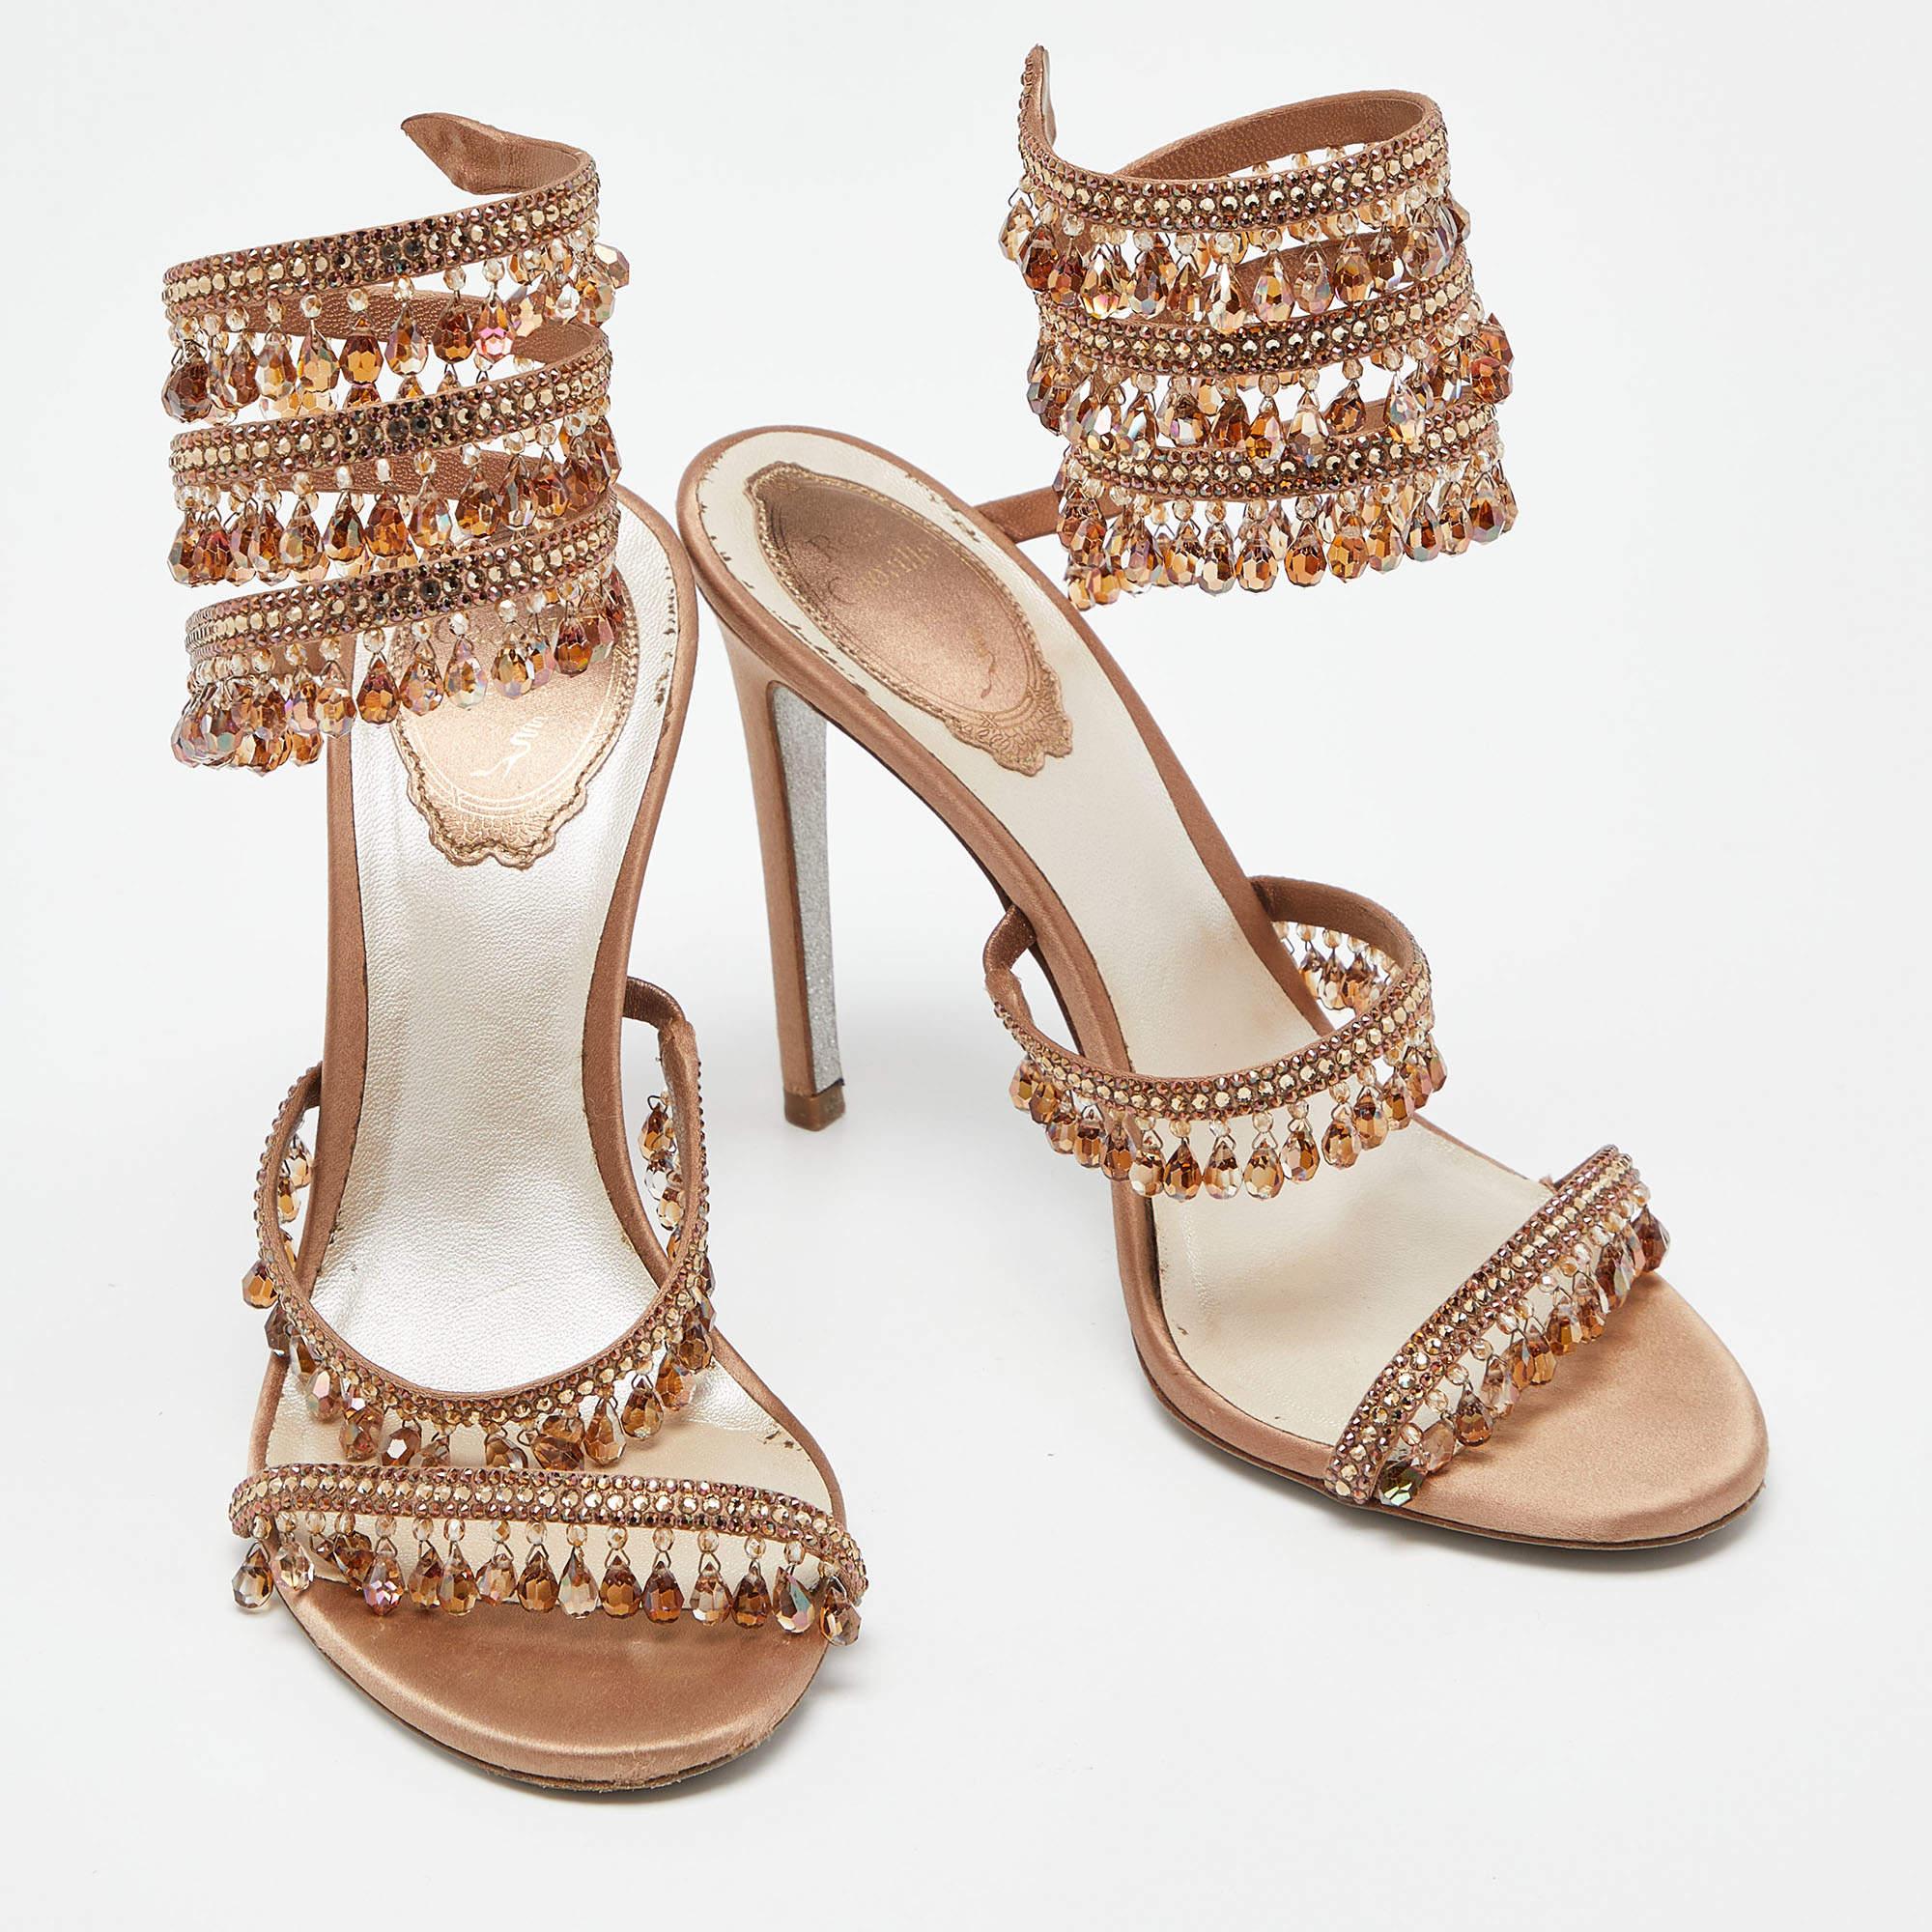 These glamorous and sparkling sandals by René Caovilla are perfect for a special evening. Crafted using white leather, they feature a spiral strap design, rows of dangling embellishments, and 10cm heels.

